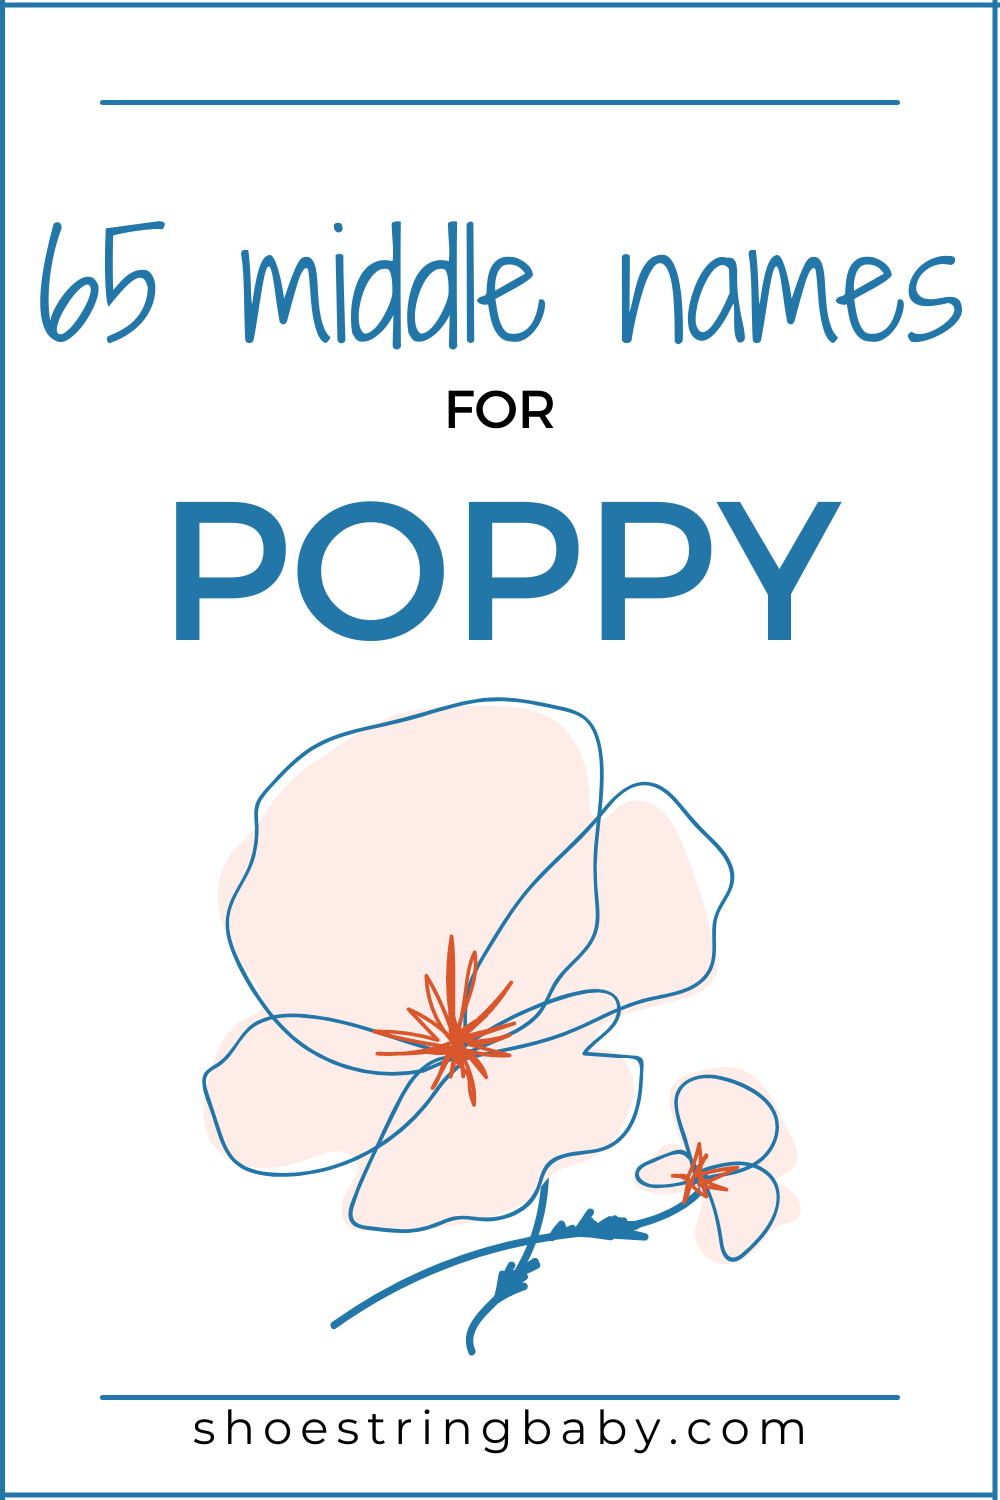 65+ Middle Names for Poppy (That Really Pop!)